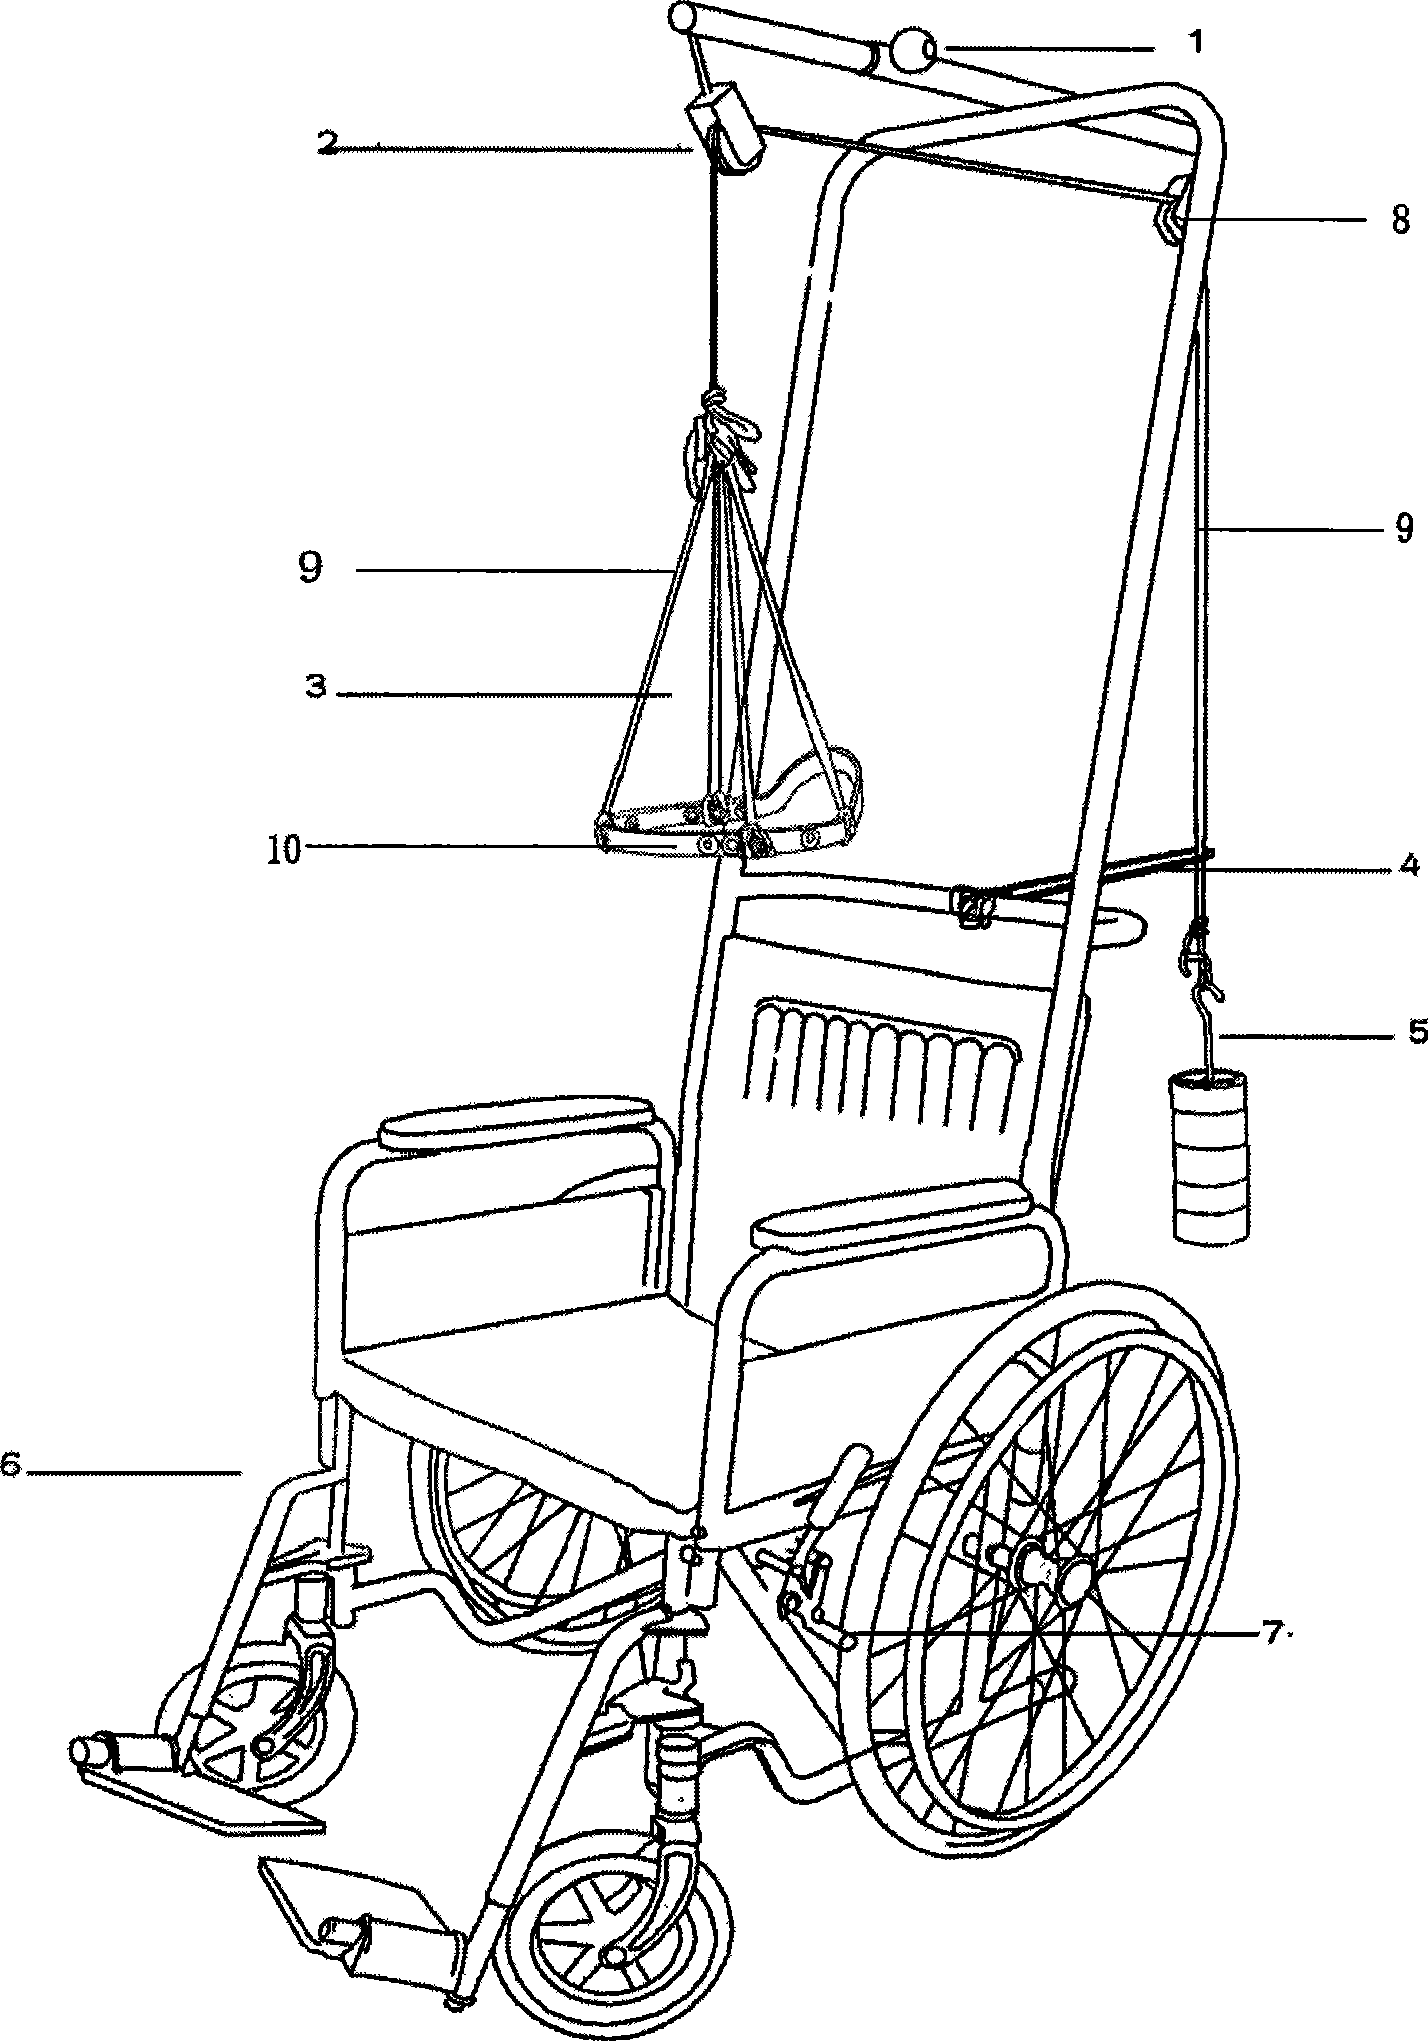 Scoliosis head circle gravity traction wheel chair